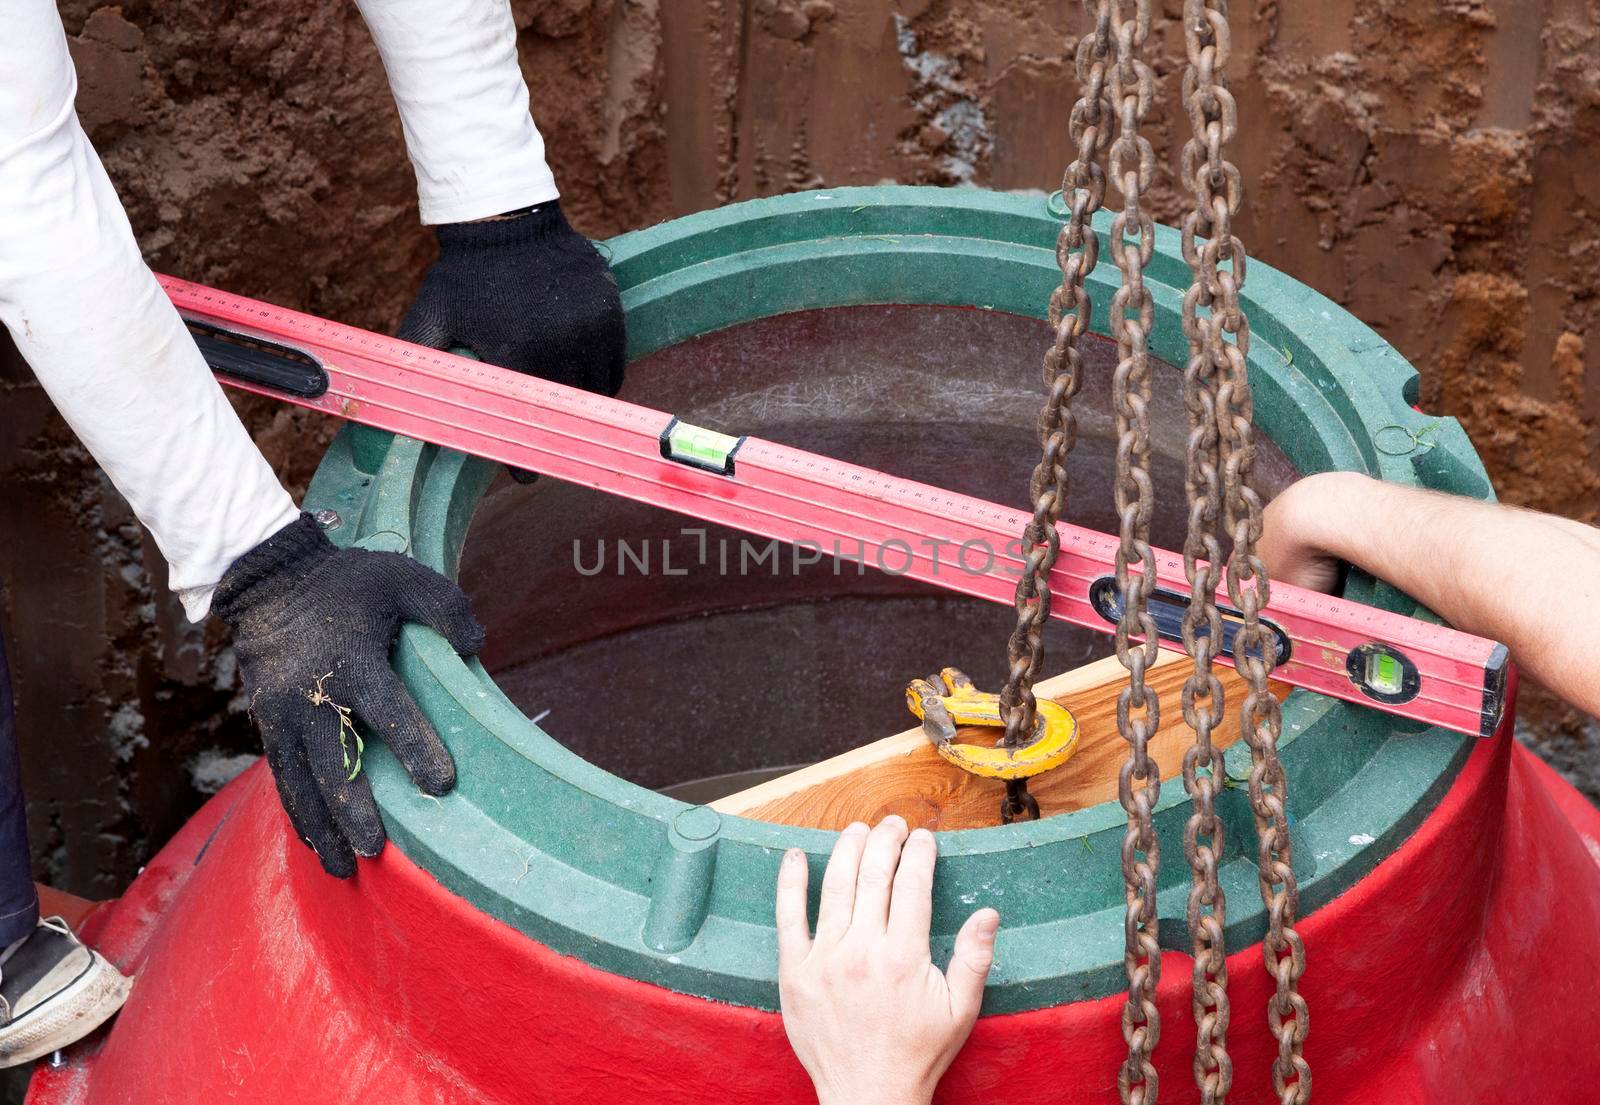 Installation of underground tank for sewage system by Nobilior